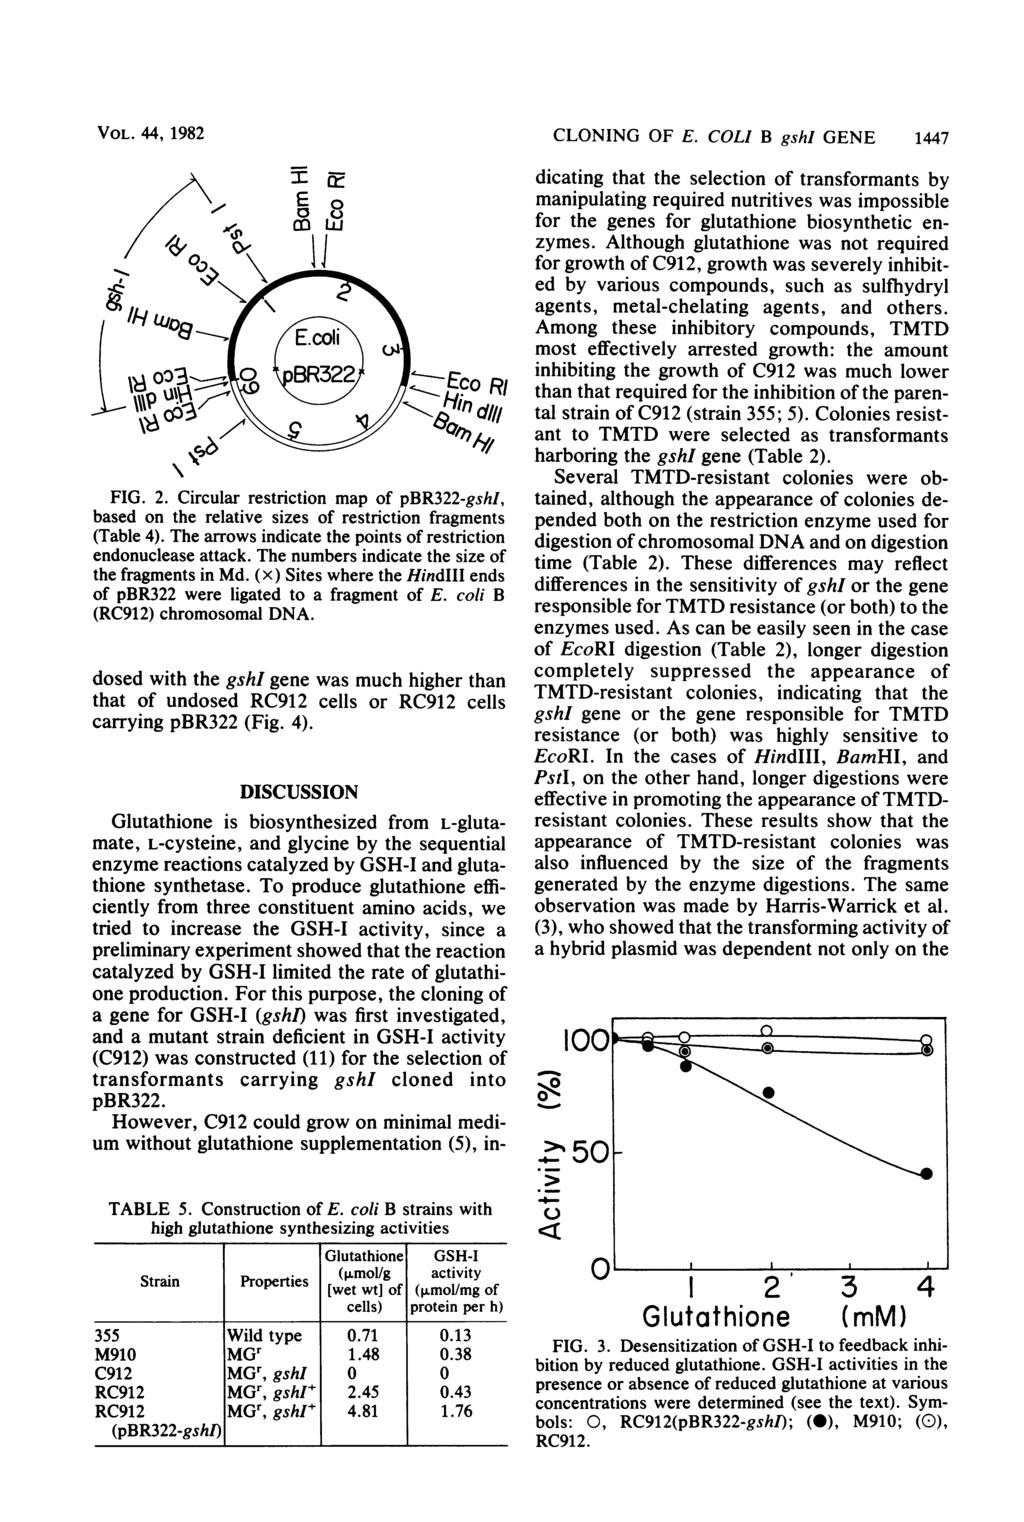 VOL. 44, 1982 X\\\\ 0 3 3 /~~~~~~// FIG. 2. Circular restriction map of pbr322-gshi, based on the relative sizes of restriction fragments (Table 4).